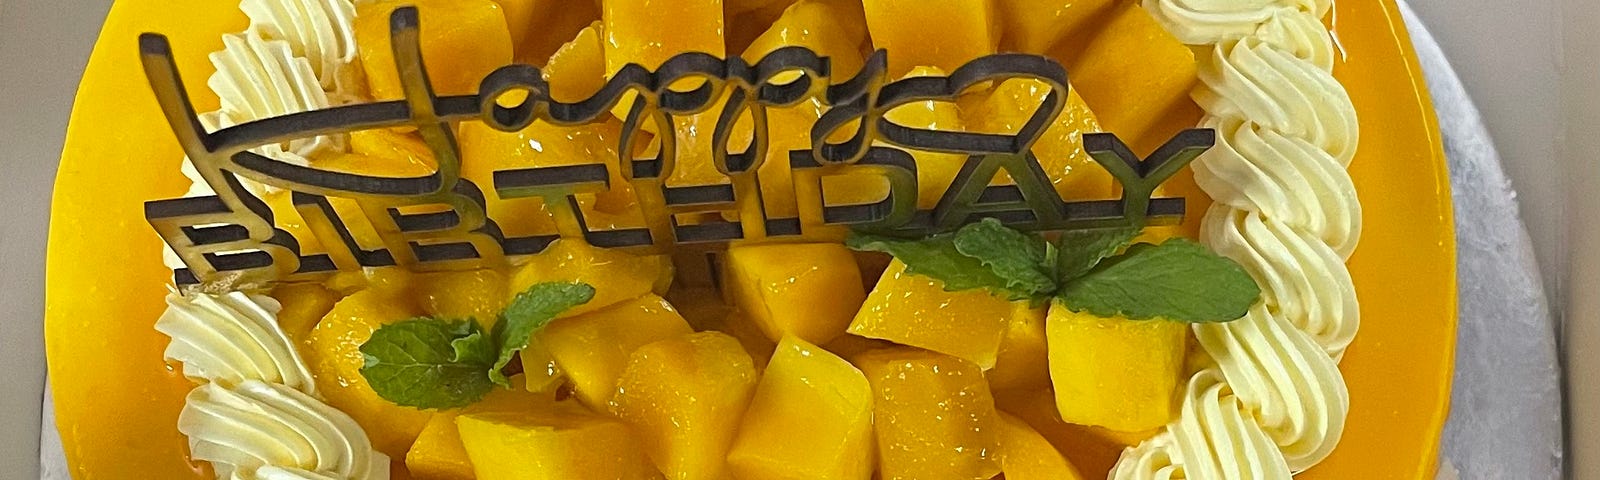 A decorated cake with a mango colored icing and fresh cut mangoes in the middle, surrounded by swirls of vanilla icing. There is a ‘Happy Birthday’ stencil stuck on the cake and the base of the cake says ‘Happy birthday Sameet’